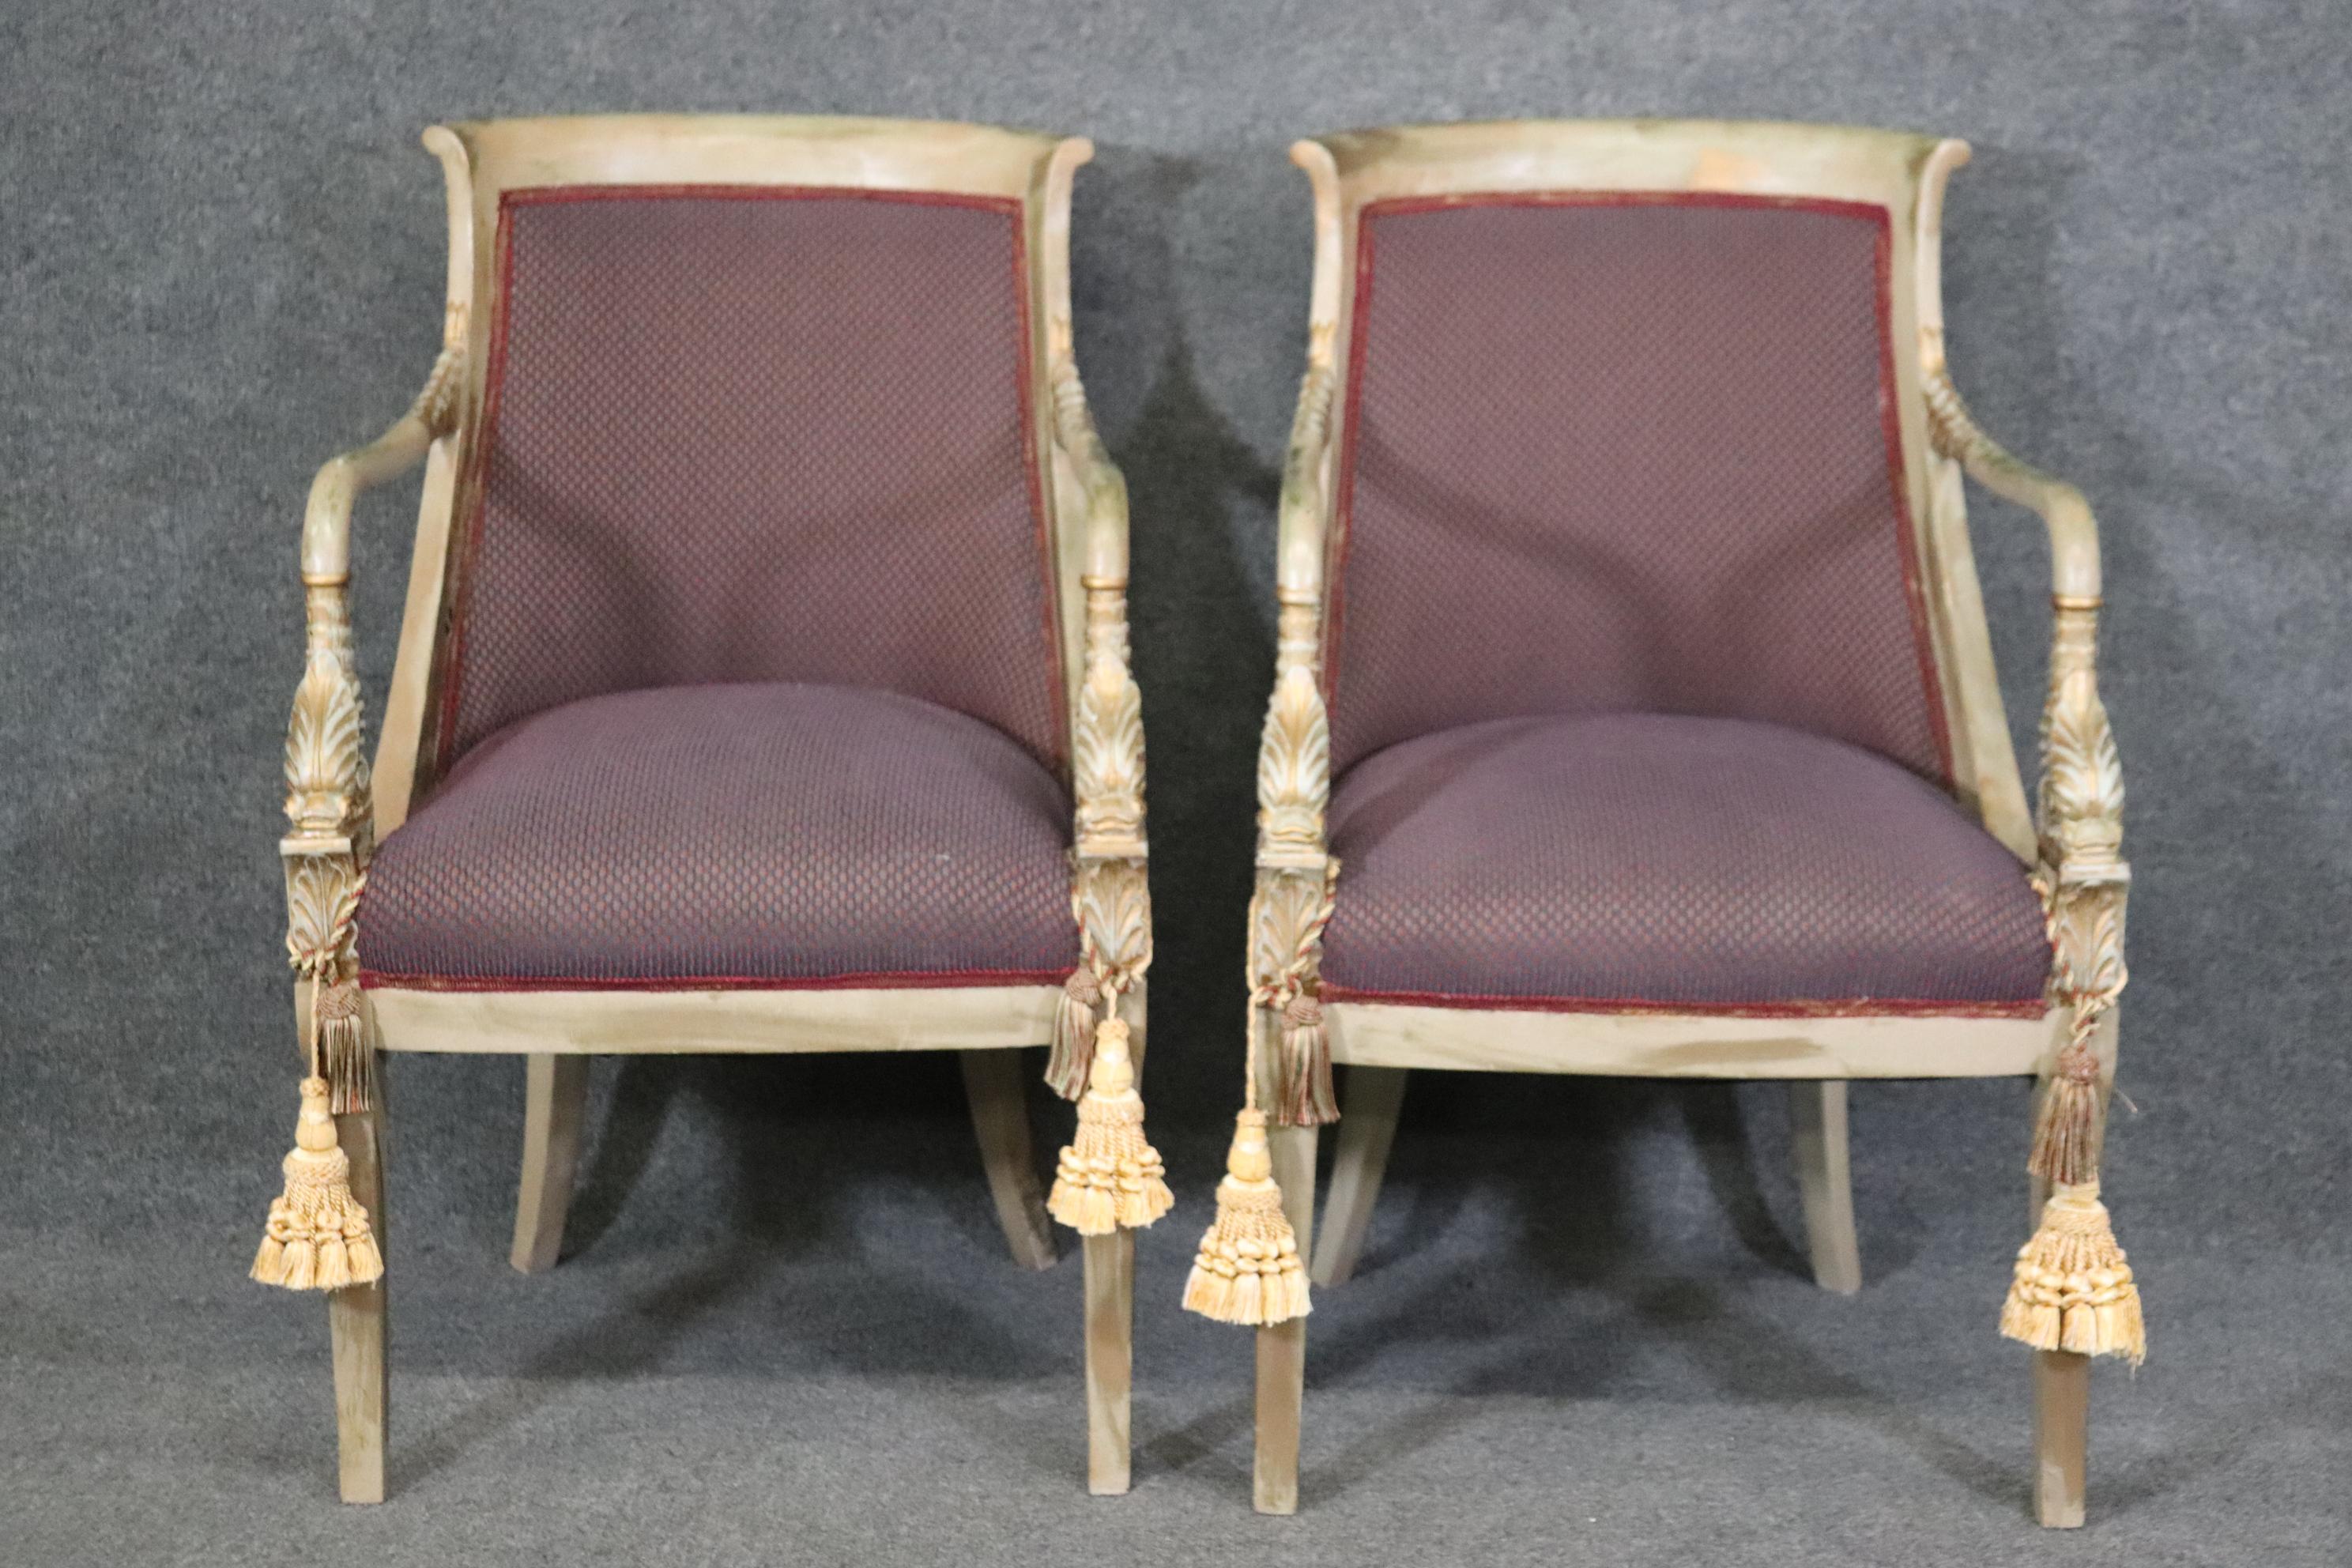 Neoclassical Revival Pair of Paint Decorated and Gilded Dolphin Head Neoclassical Bergere Chairs For Sale